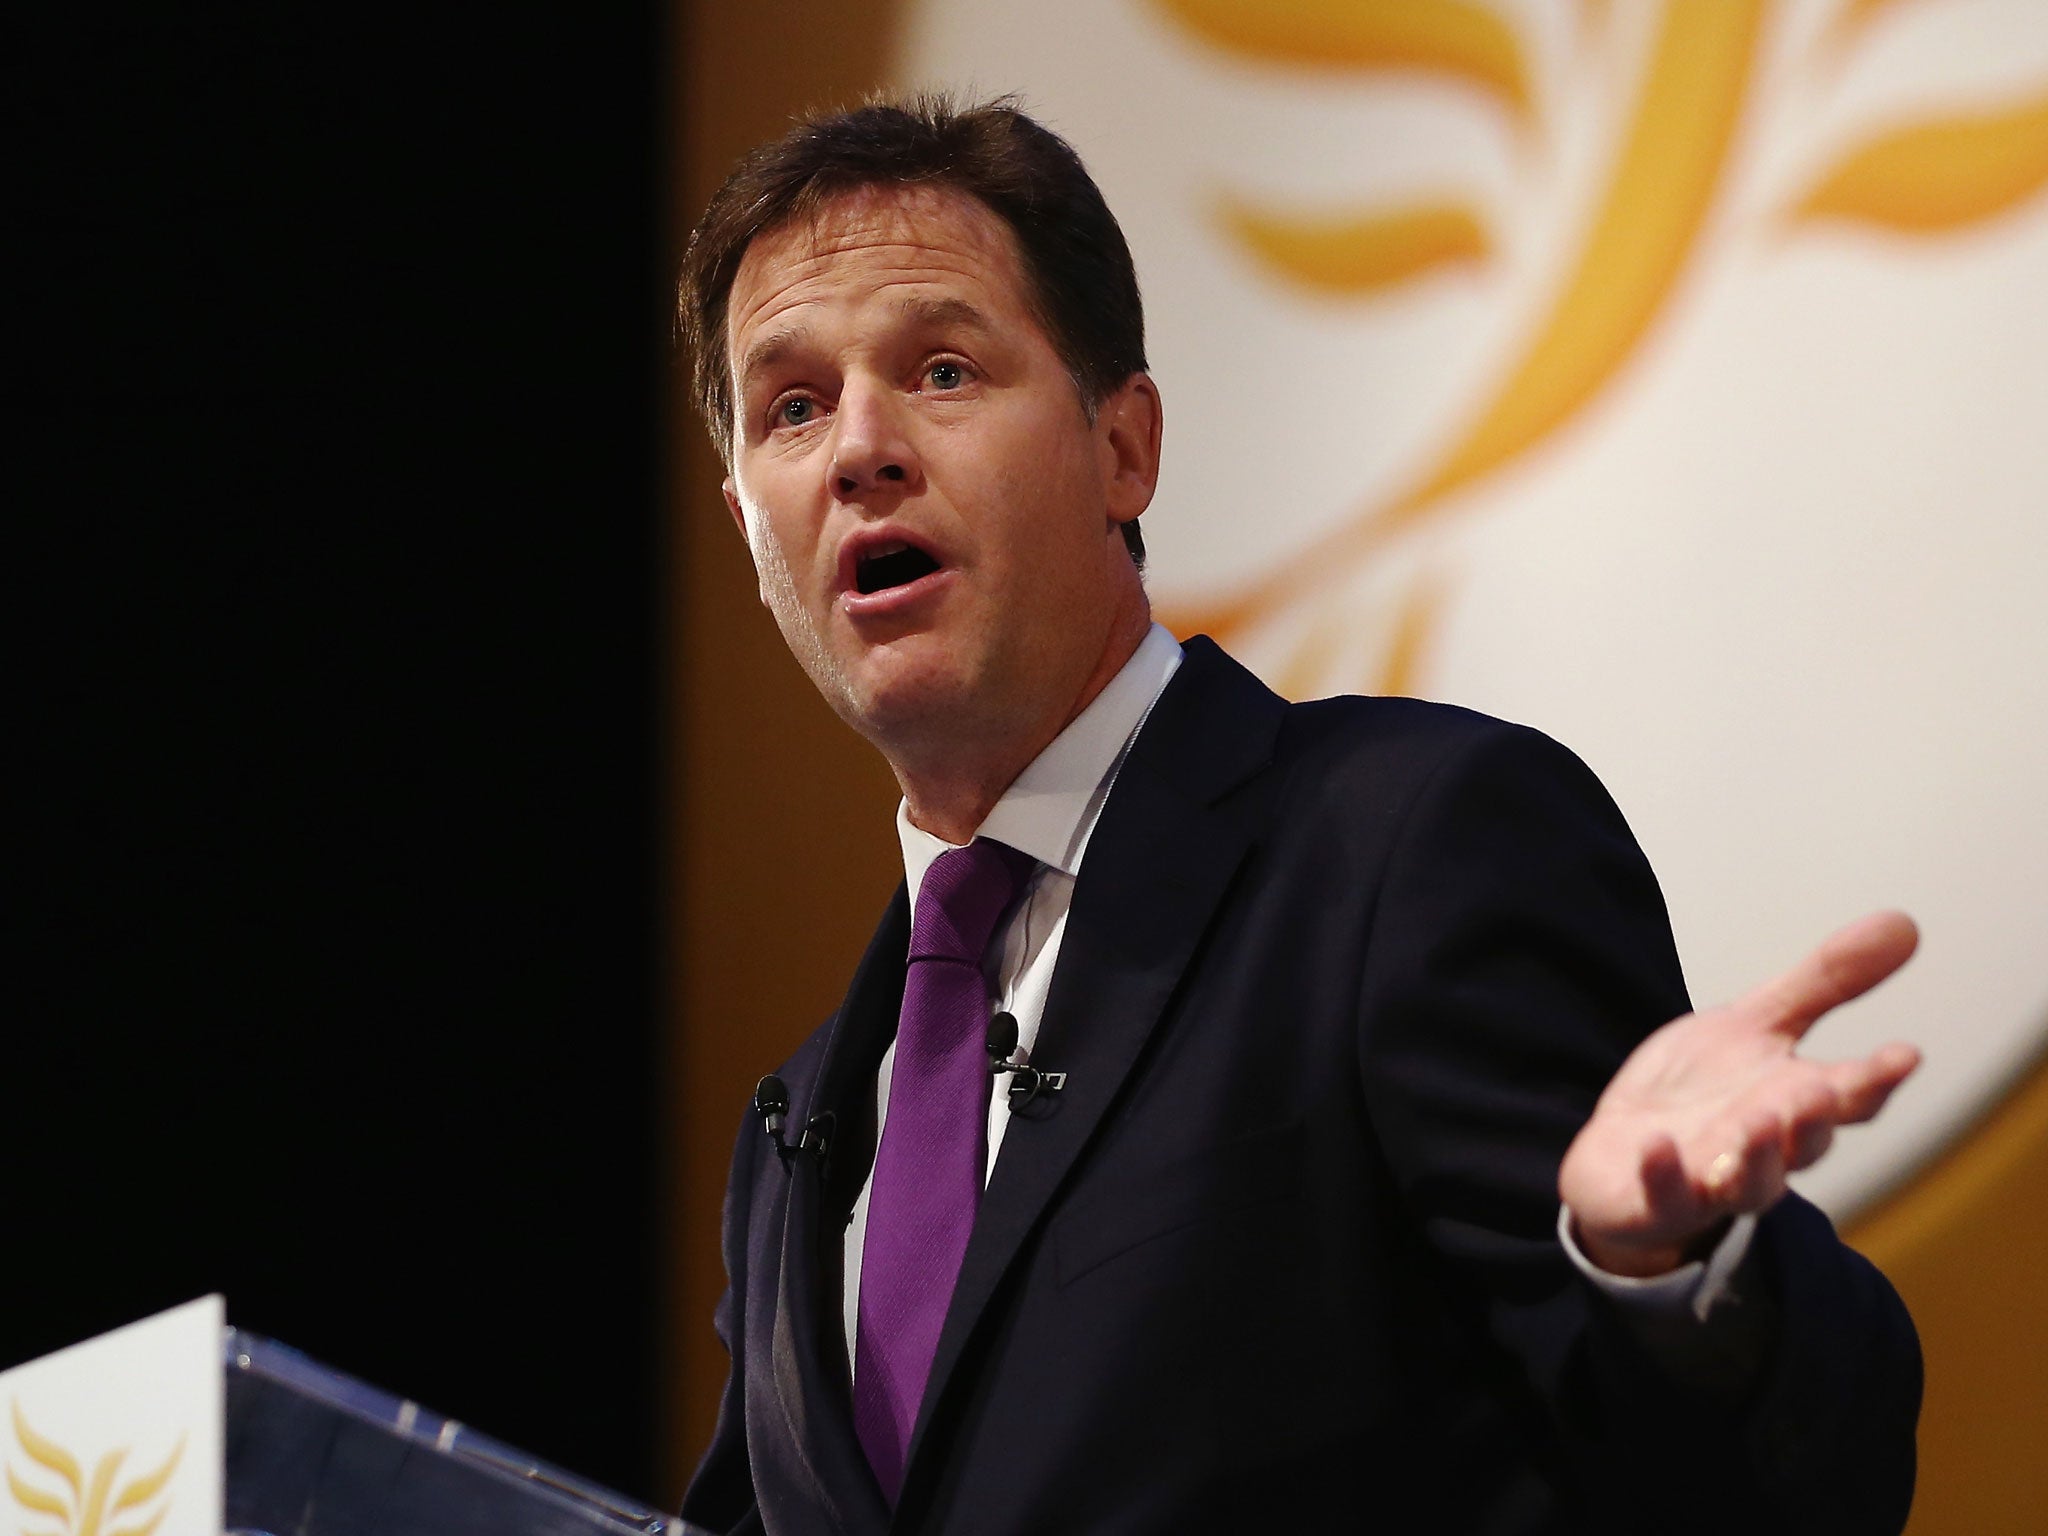 An exit from Brussels would be “economic suicide”, Mr Clegg will say in a speech tomorrow